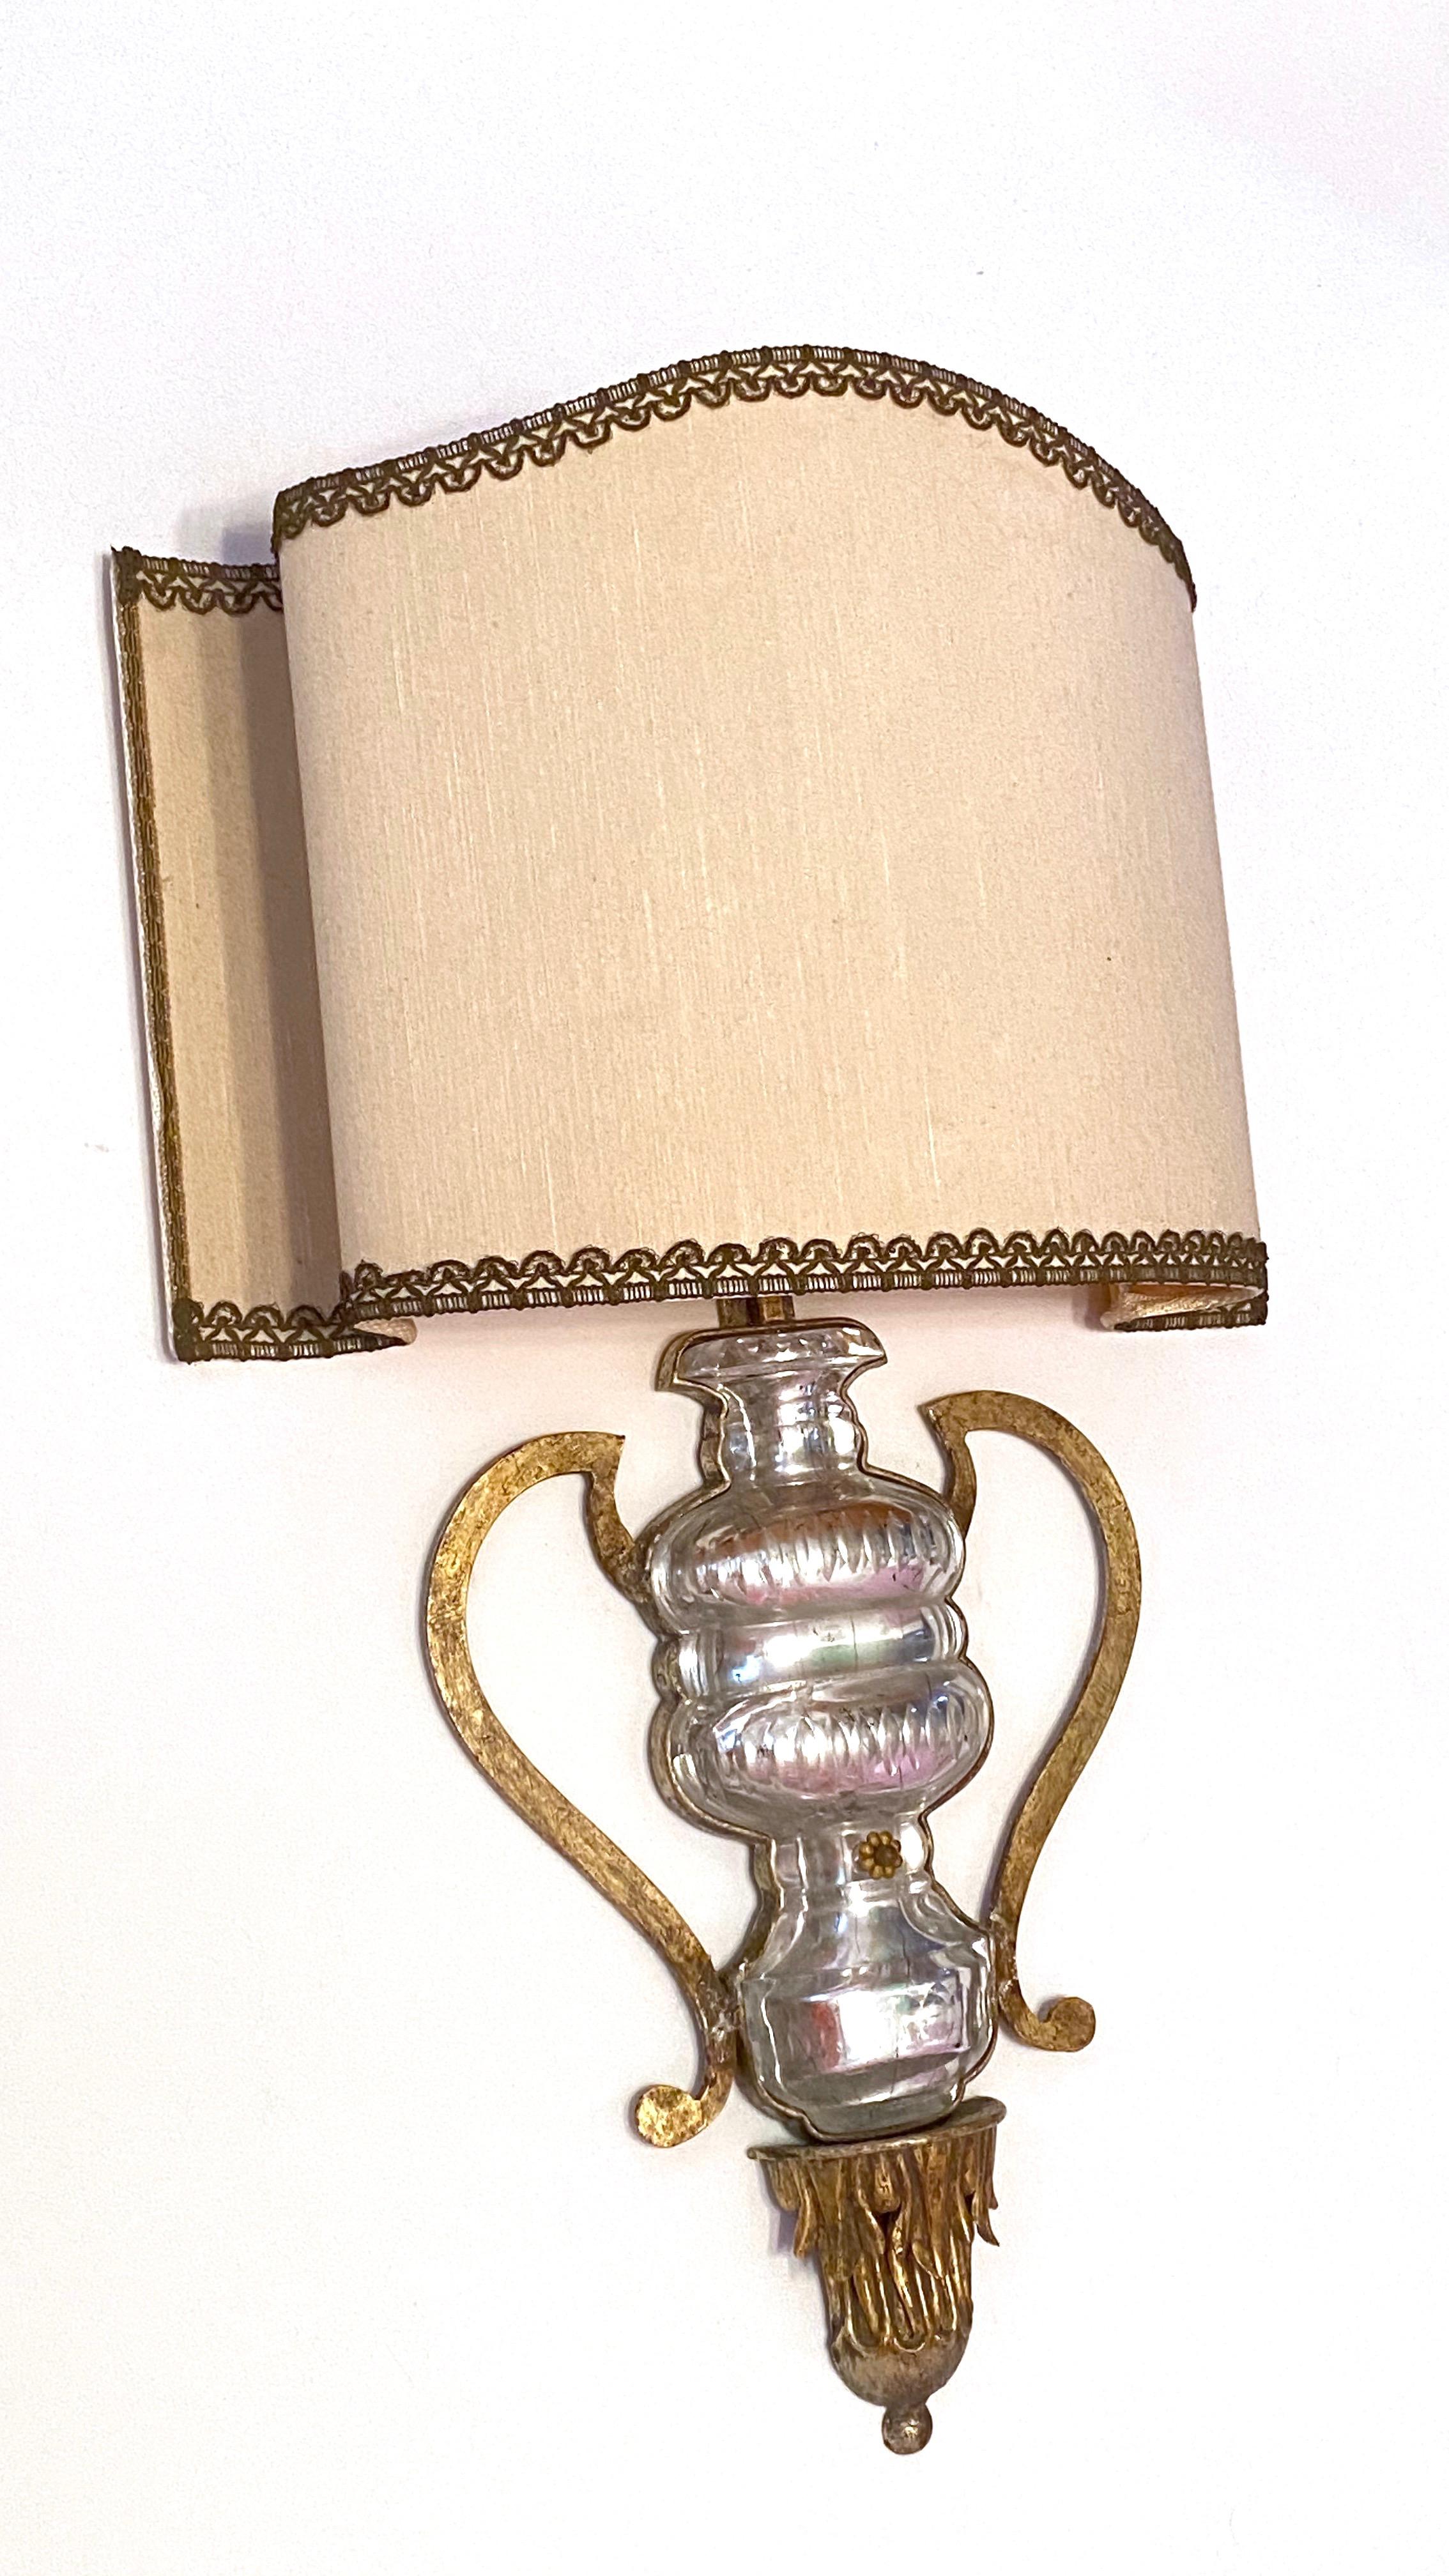 Mid-20th Century Gorgeous Monumental Italian Crystal Urn Motif Wall Sconce by Banci Florence For Sale